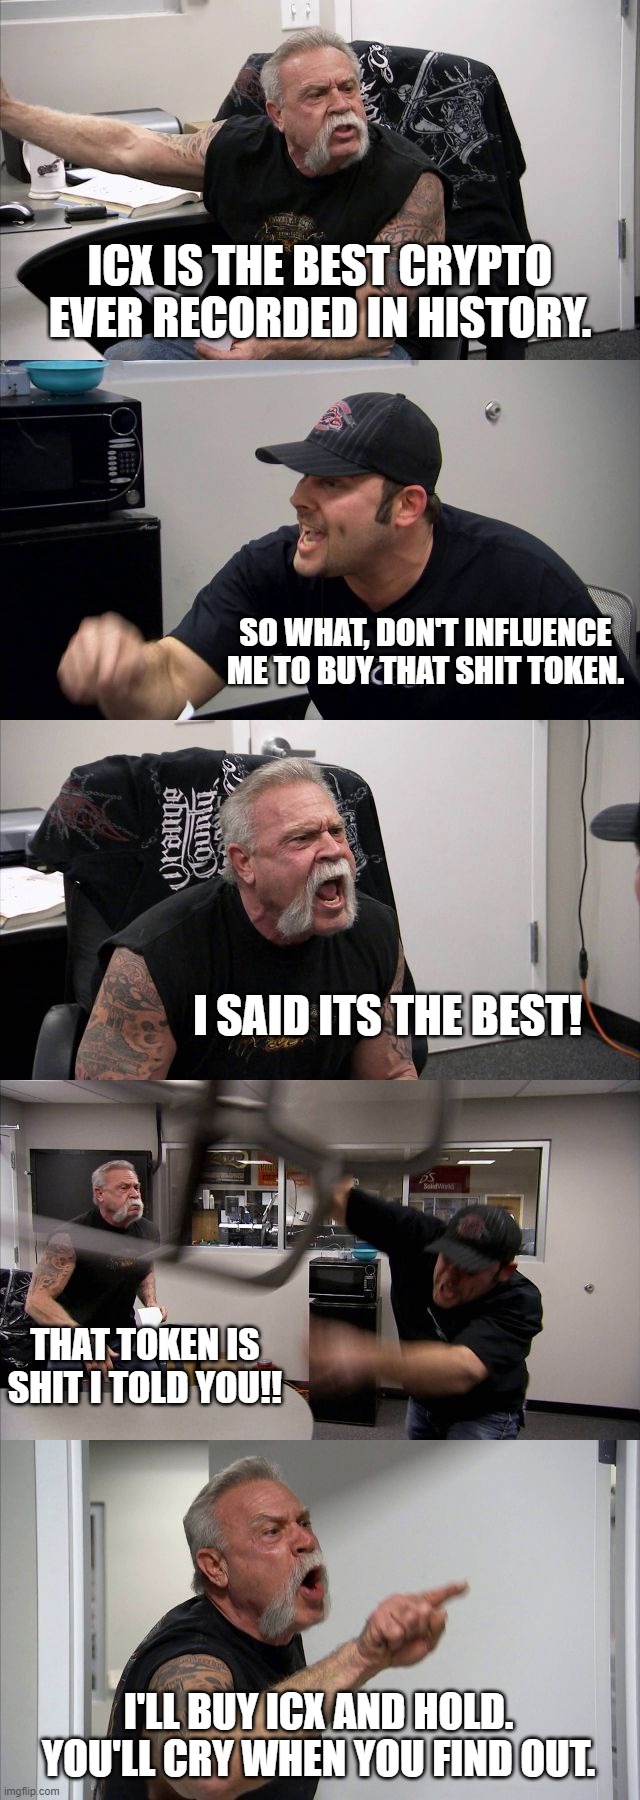 American Chopper Argument Meme | ICX IS THE BEST CRYPTO EVER RECORDED IN HISTORY. SO WHAT, DON'T INFLUENCE ME TO BUY THAT SHIT TOKEN. I SAID ITS THE BEST! THAT TOKEN IS SHIT I TOLD YOU!! I'LL BUY ICX AND HOLD. YOU'LL CRY WHEN YOU FIND OUT. | image tagged in memes,american chopper argument | made w/ Imgflip meme maker